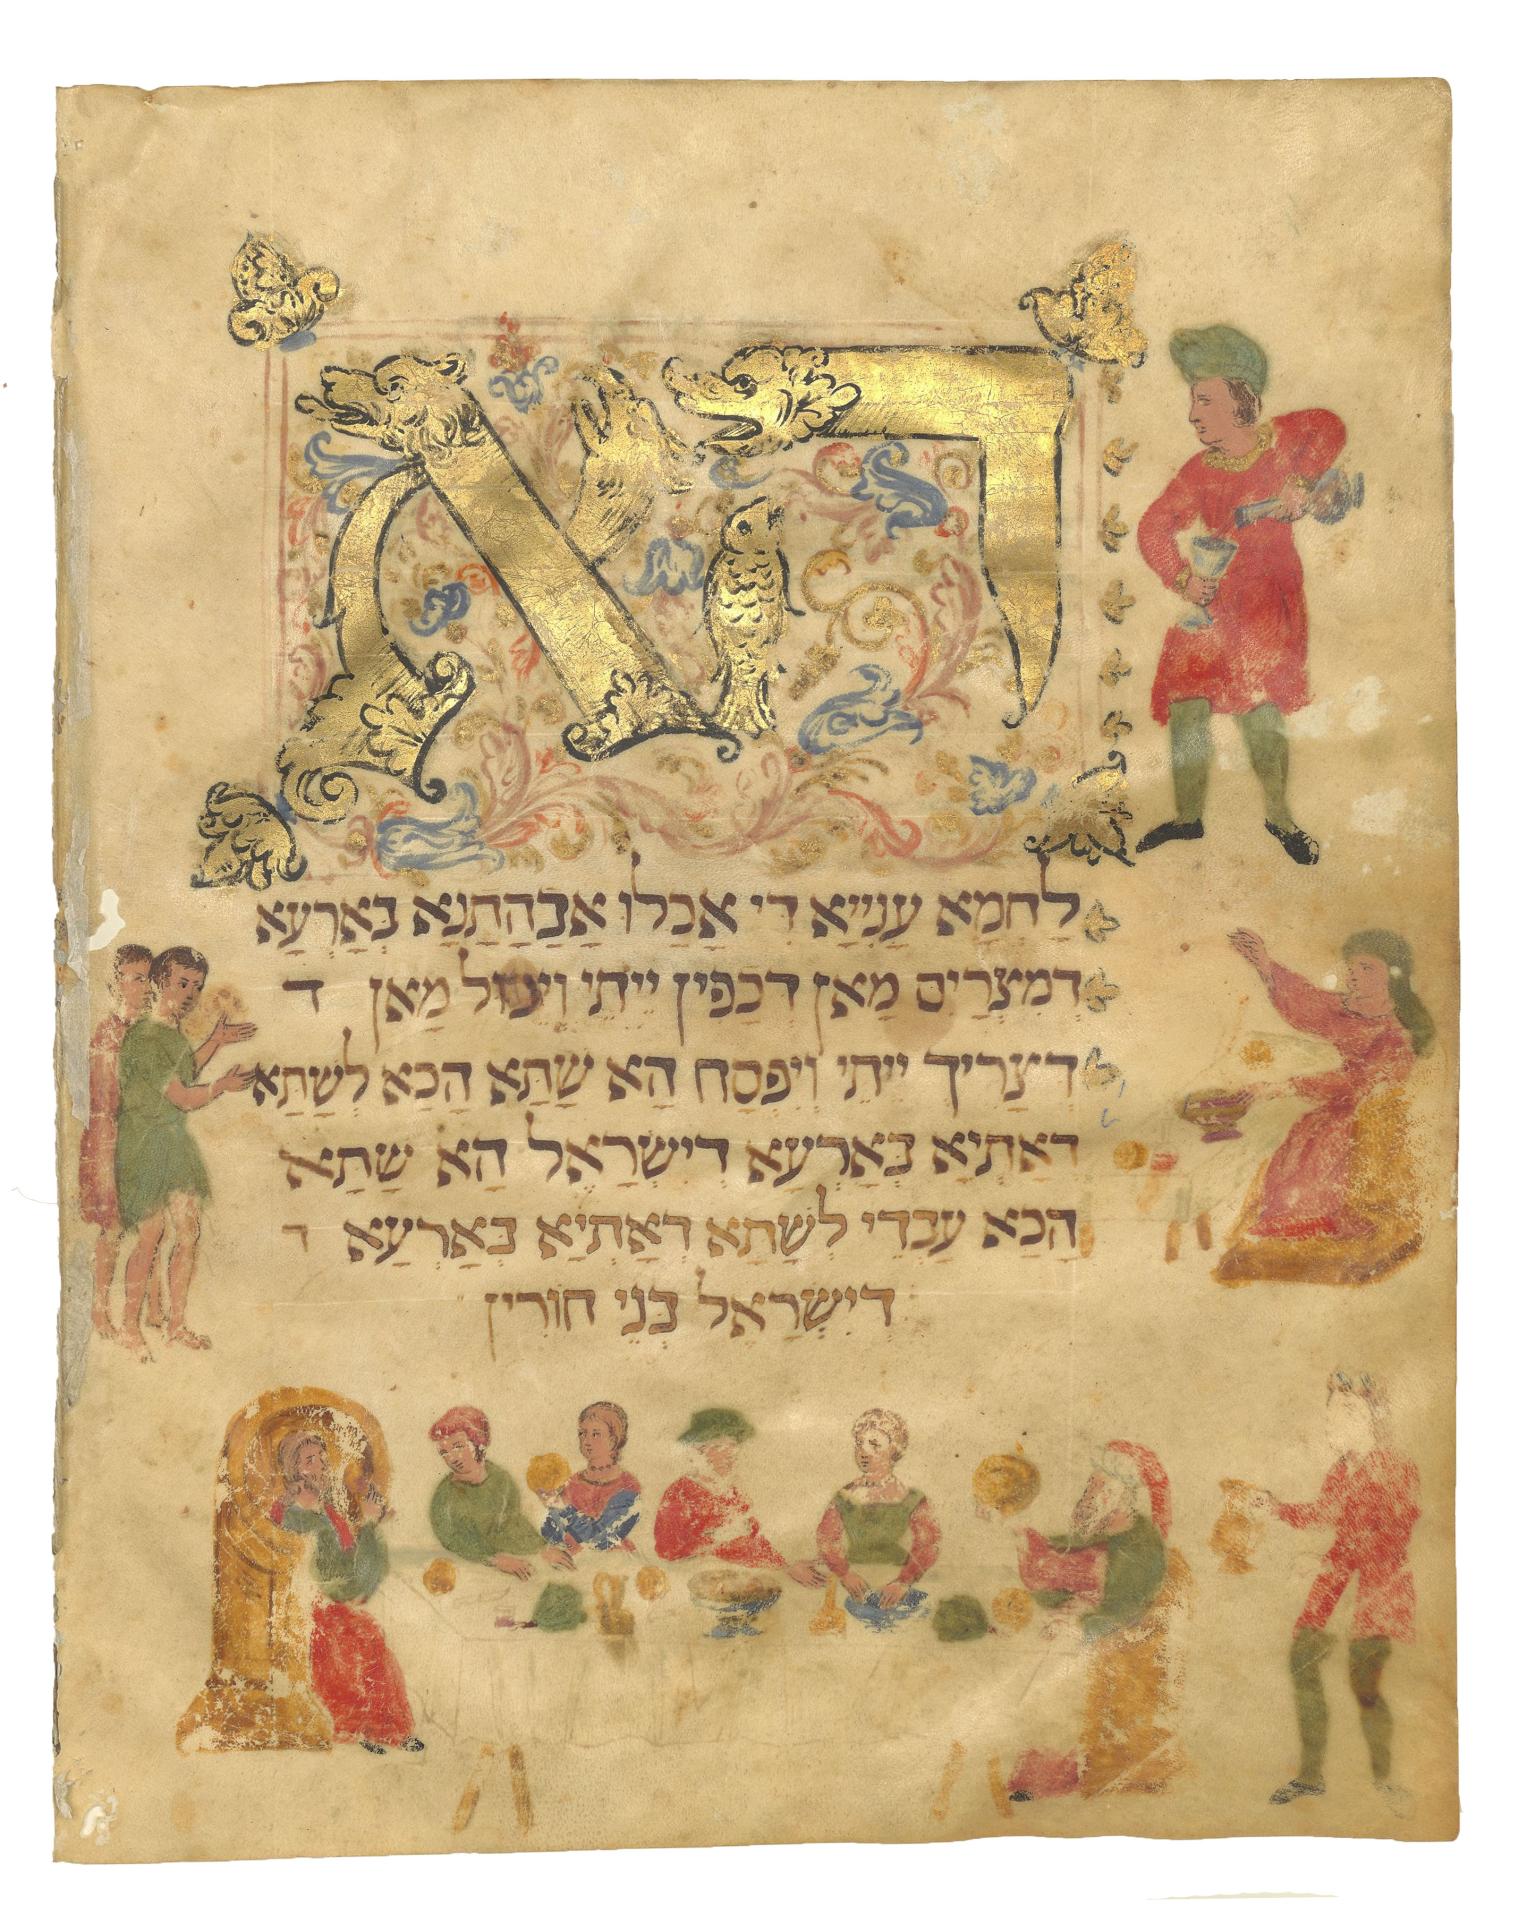 Manuscript page with Hebrew text in center, large decorated Hebrew word at the top of the page next to illustration of figure at top right pouring wine, and illustration of people seated at table at bottom of page.  